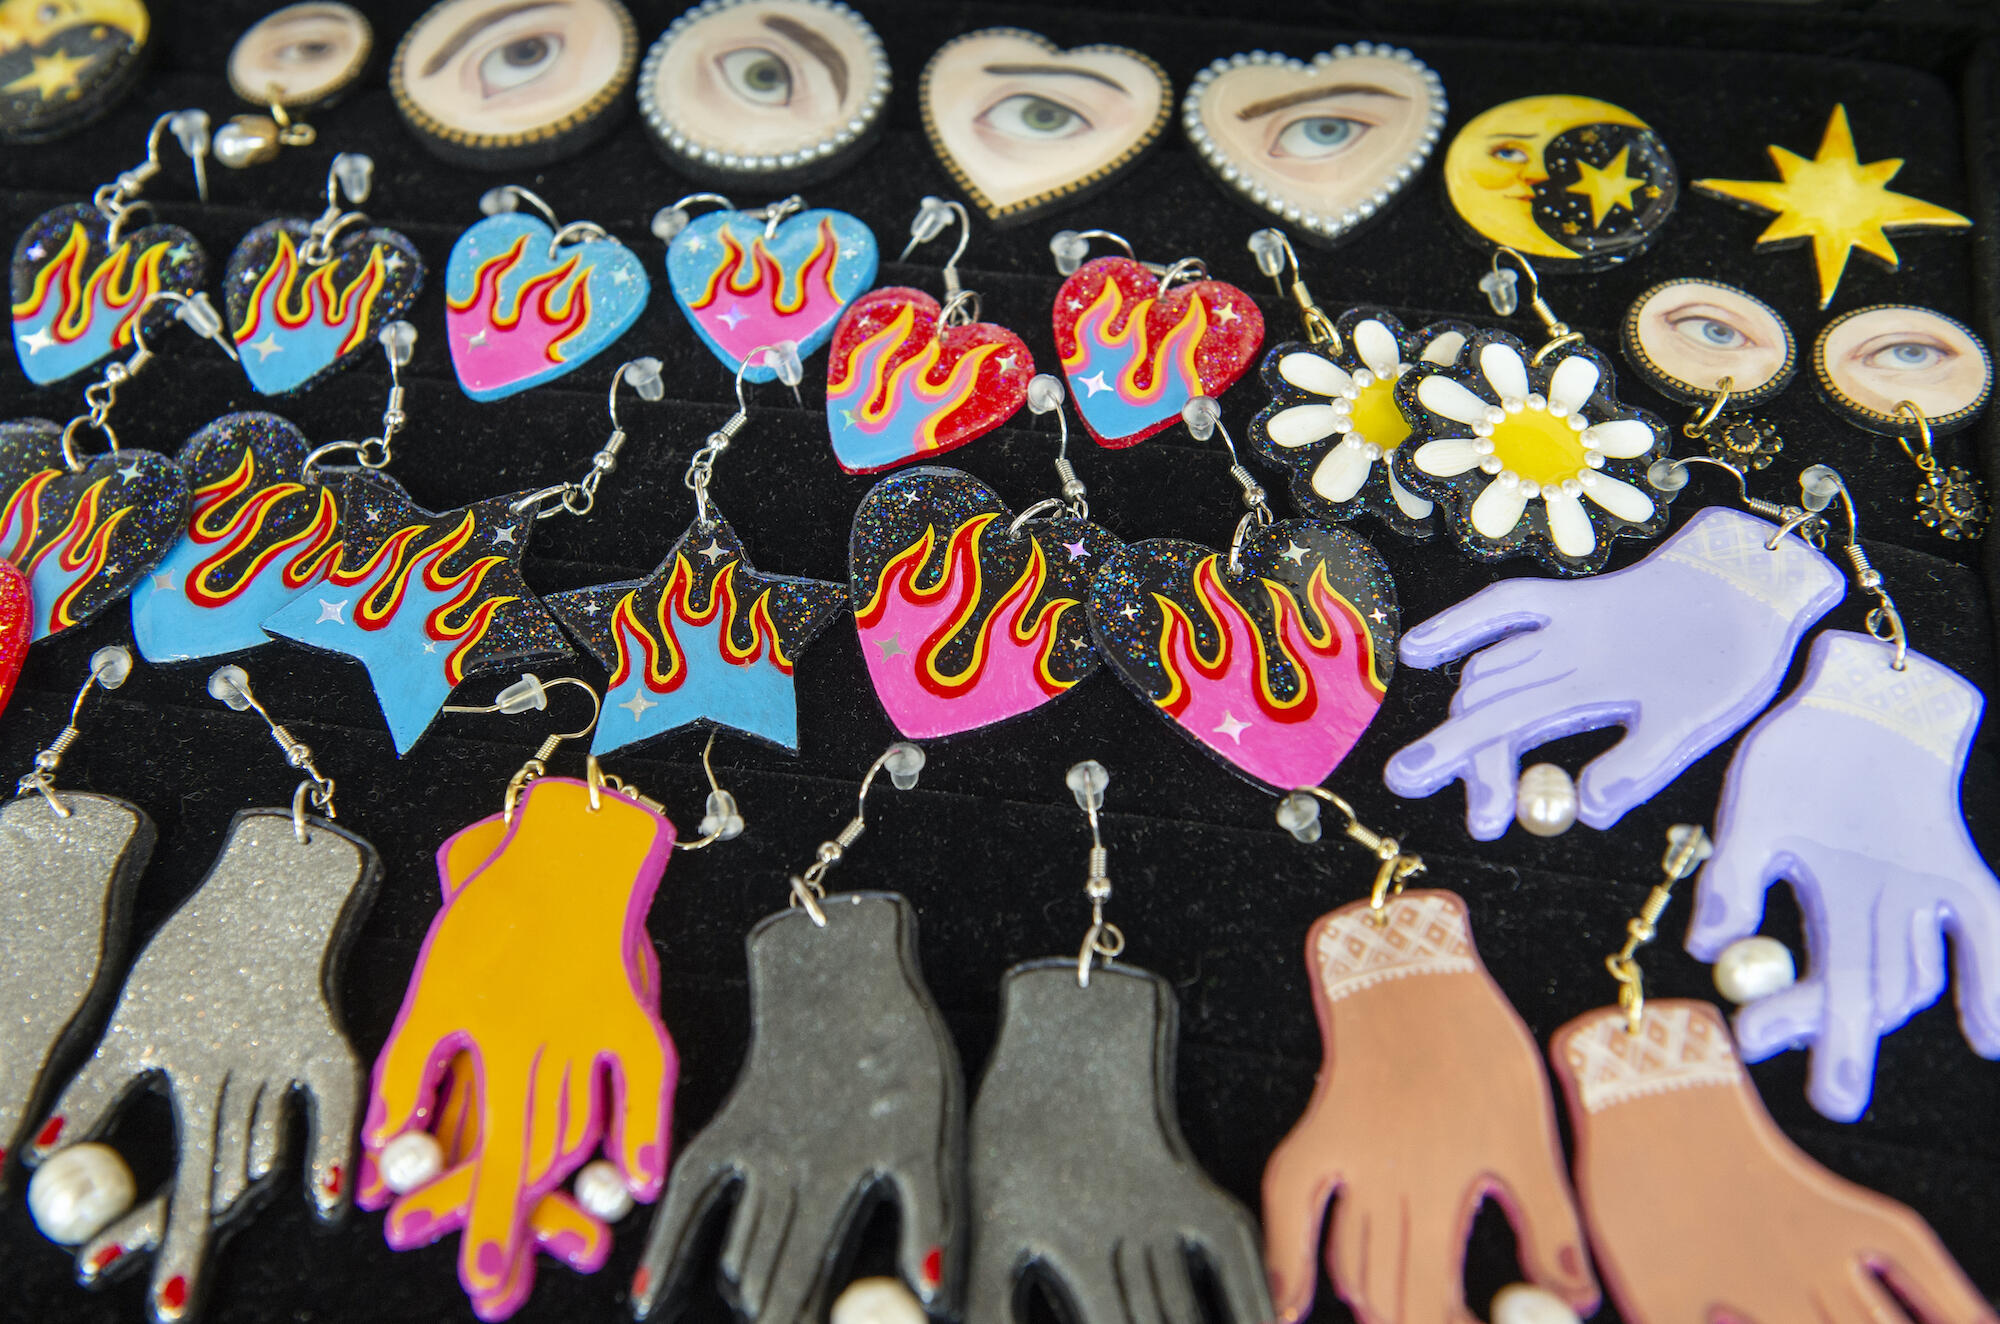 Earrings made by Abby Giuseppe. These are hand cut clay earrings/clay which are baked and painted.